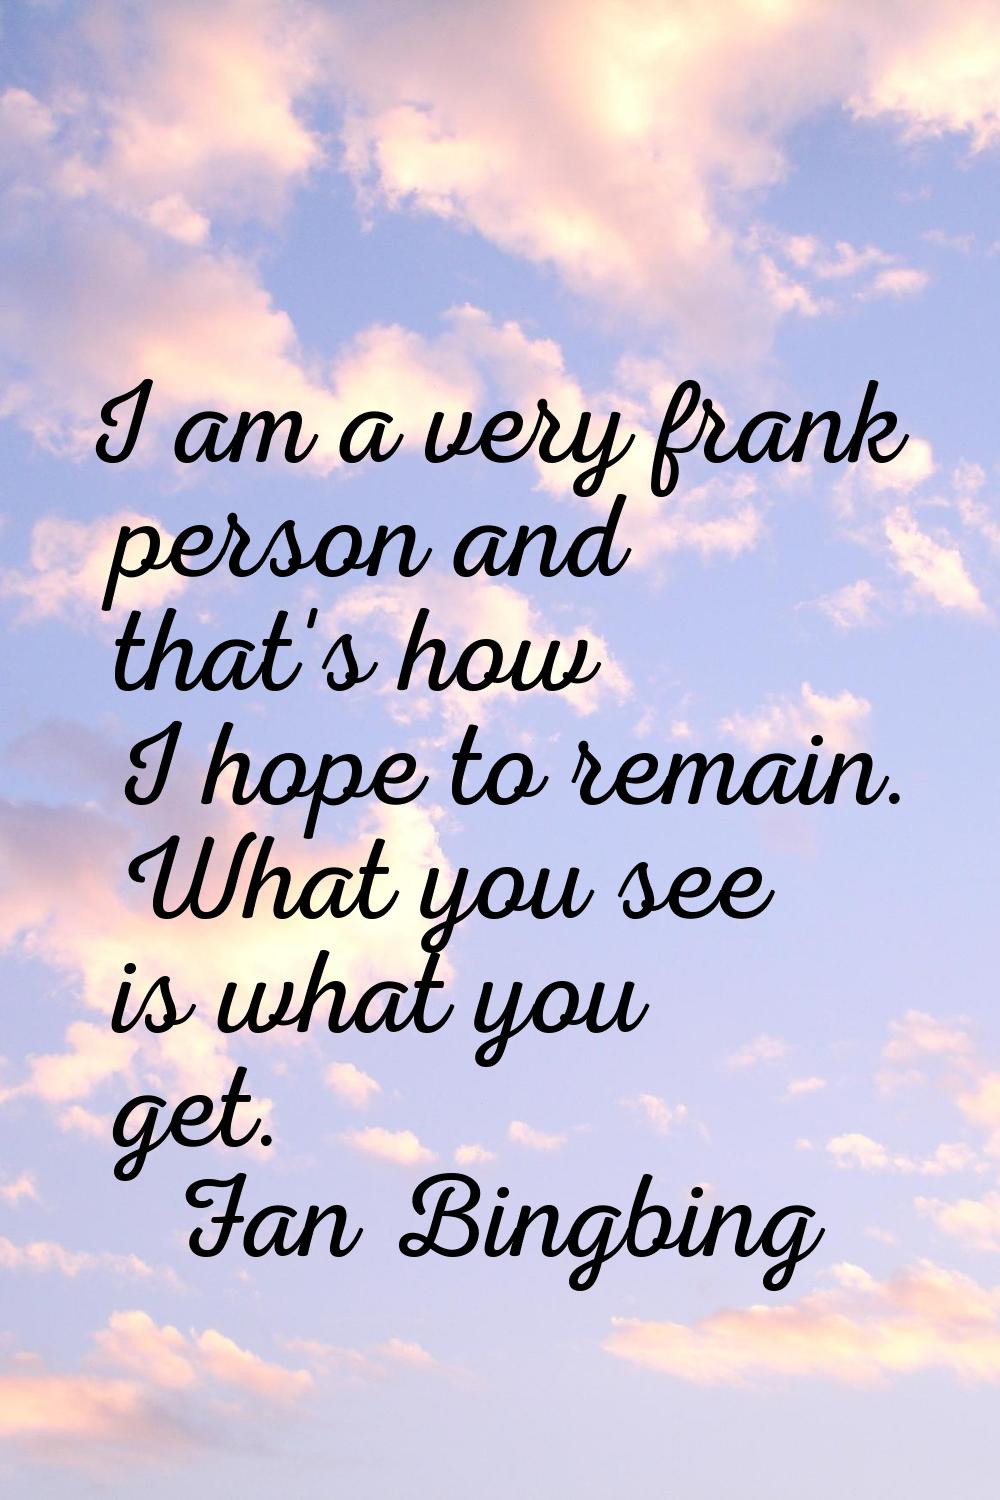 I am a very frank person and that's how I hope to remain. What you see is what you get.